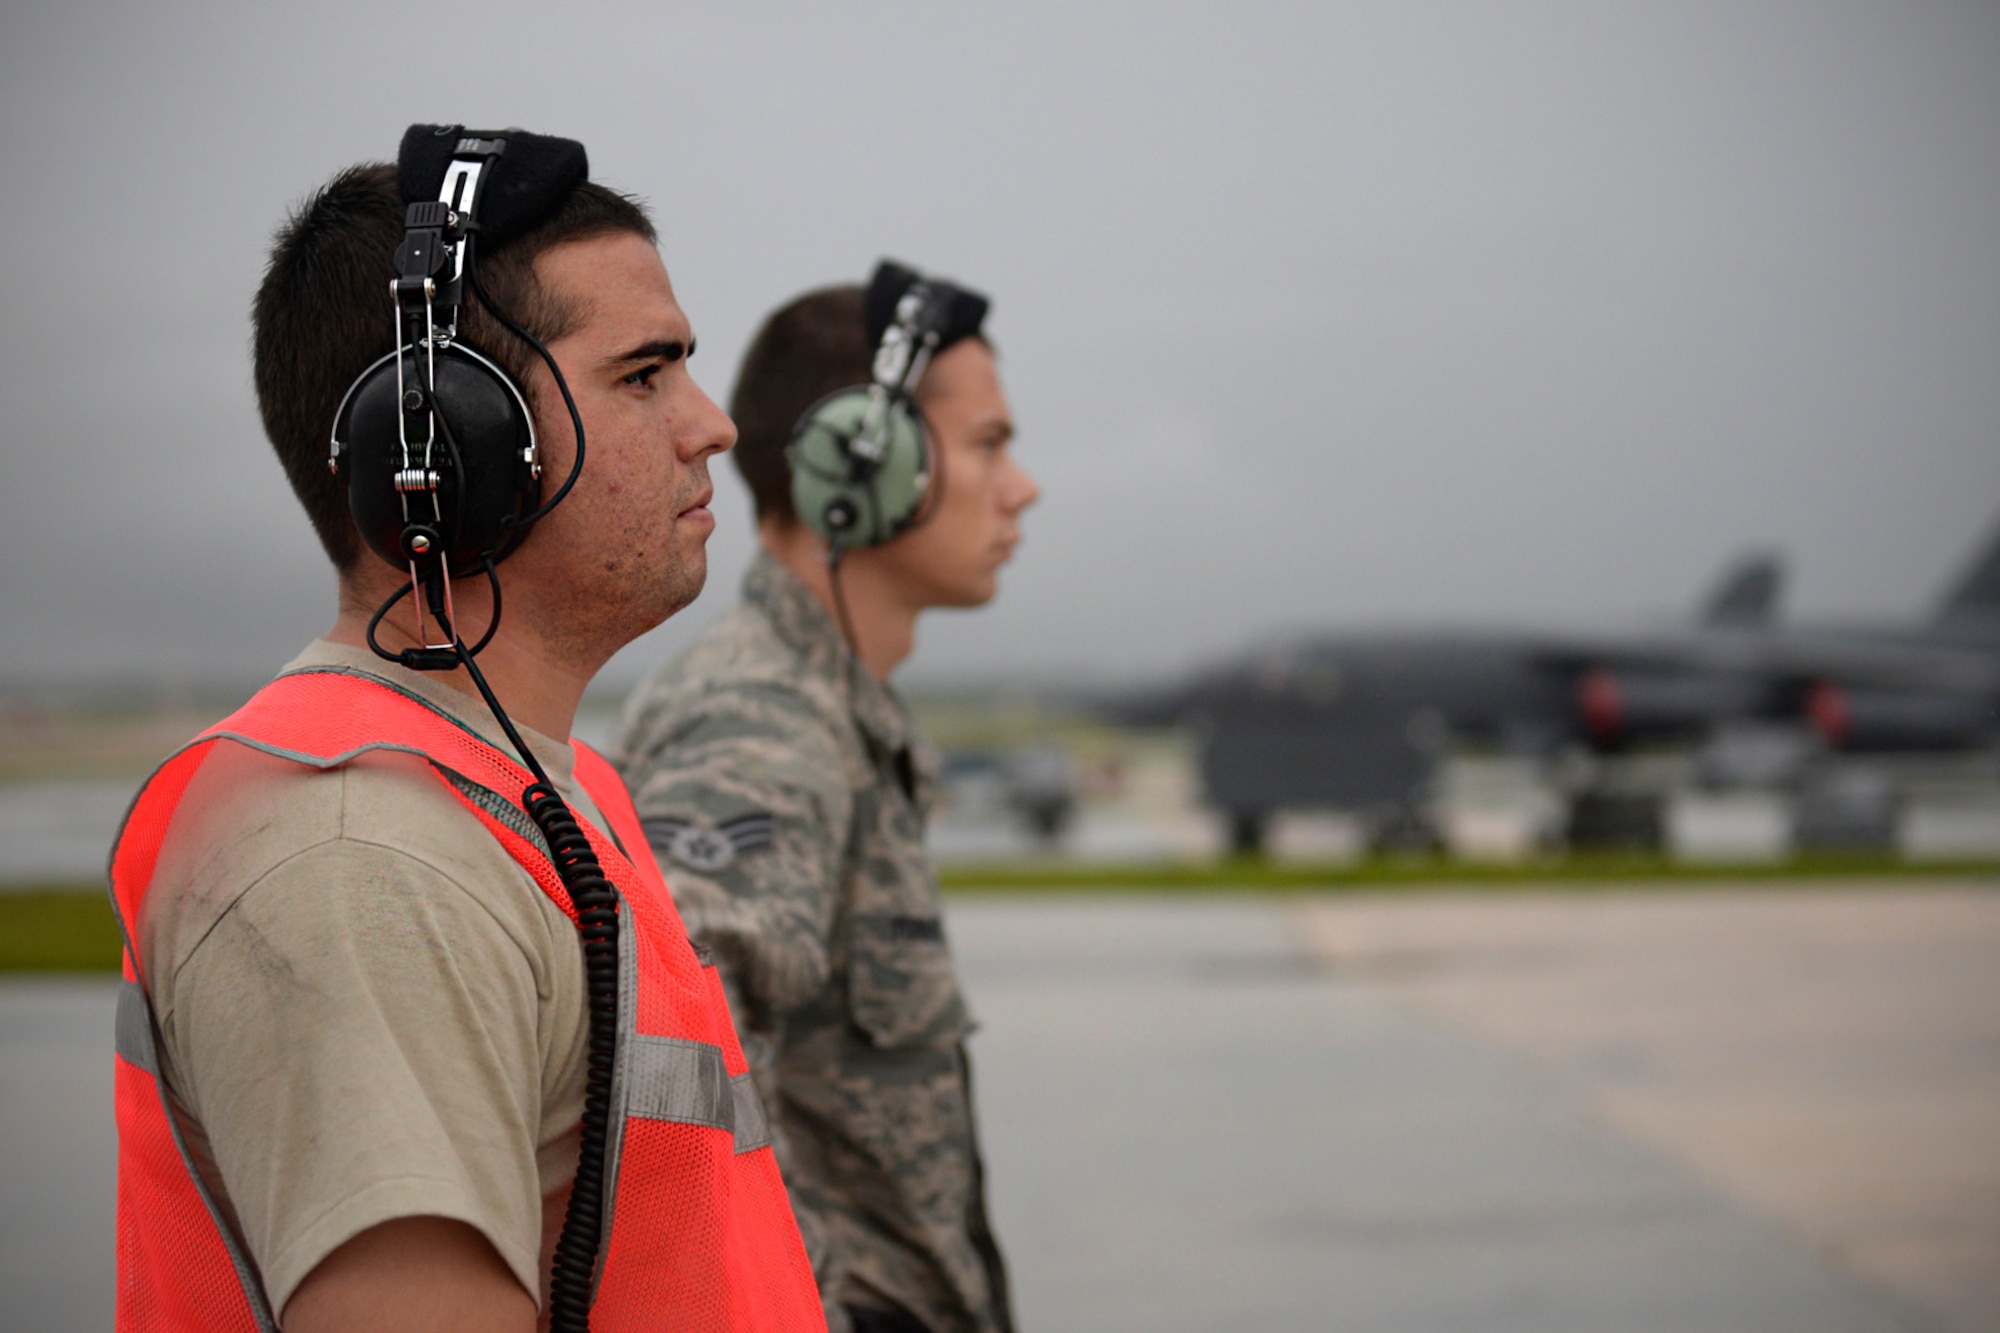 Senior Airmen Taylor Giordano, left, and Logan Turner, B-52 Stratofortress crew chiefs assigned to the 20th Expeditionary Aircraft Maintenance Squadron, observe their aircraft during preflight checks Aug. 22, 2015, at Andersen Air Force Base, Guam. Bomber crews with the 20th Expeditionary Bomb Squadron are part of U.S. Pacific Command’s continuous bomber presence and support ongoing operations in the Indo-Asia-Pacific region. (U.S. Air Force photo by Staff Sgt. Alexander W. Riedel/Released)